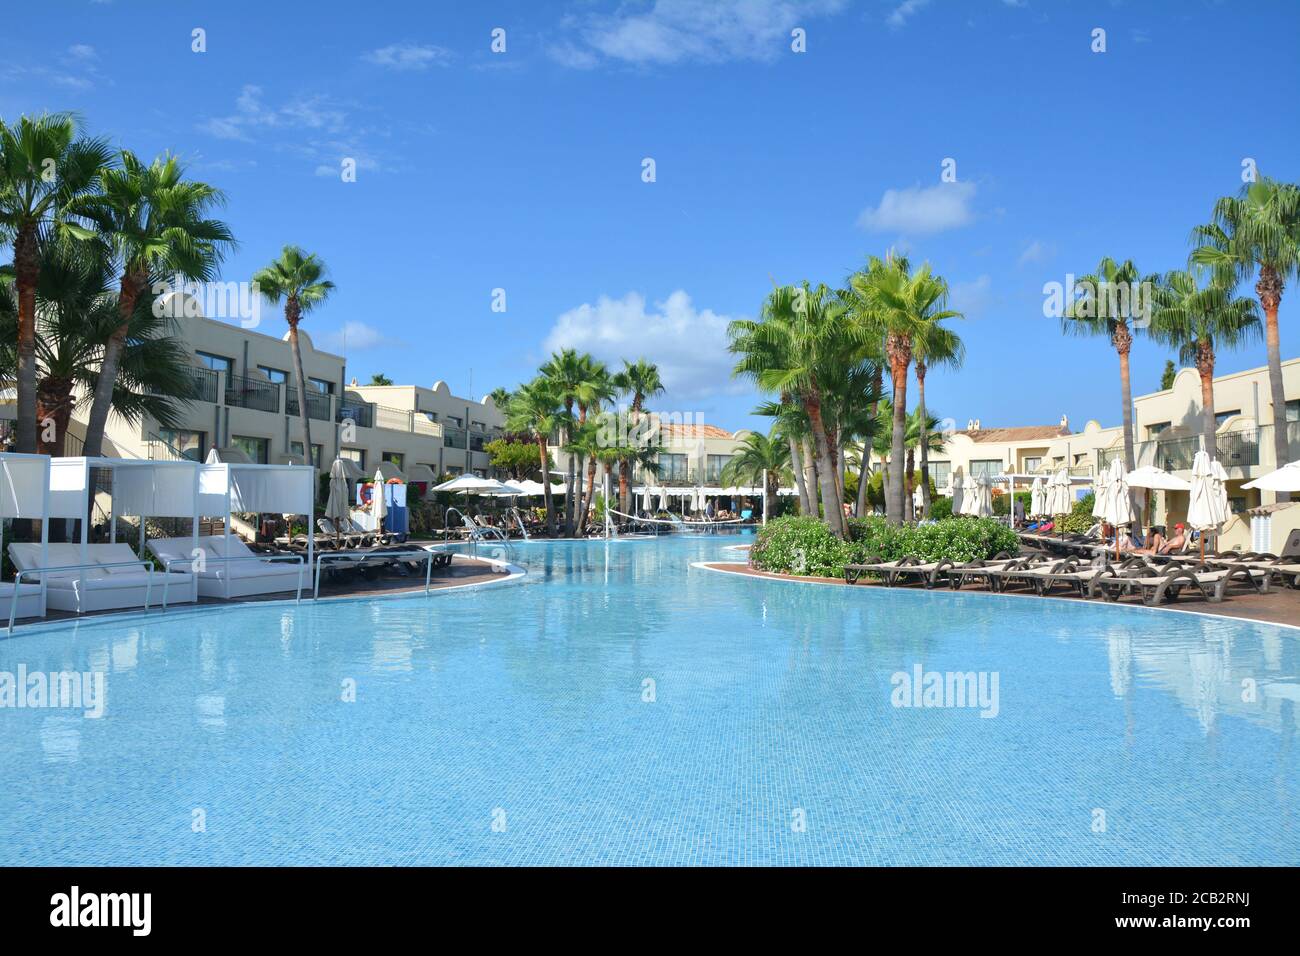 CALA'N BOSCH, MENORCA, SPAIN - AUGUST 14, 2018 : Swimming pool and palm trees in a vacation resort Valentin Star hotel. Stock Photo